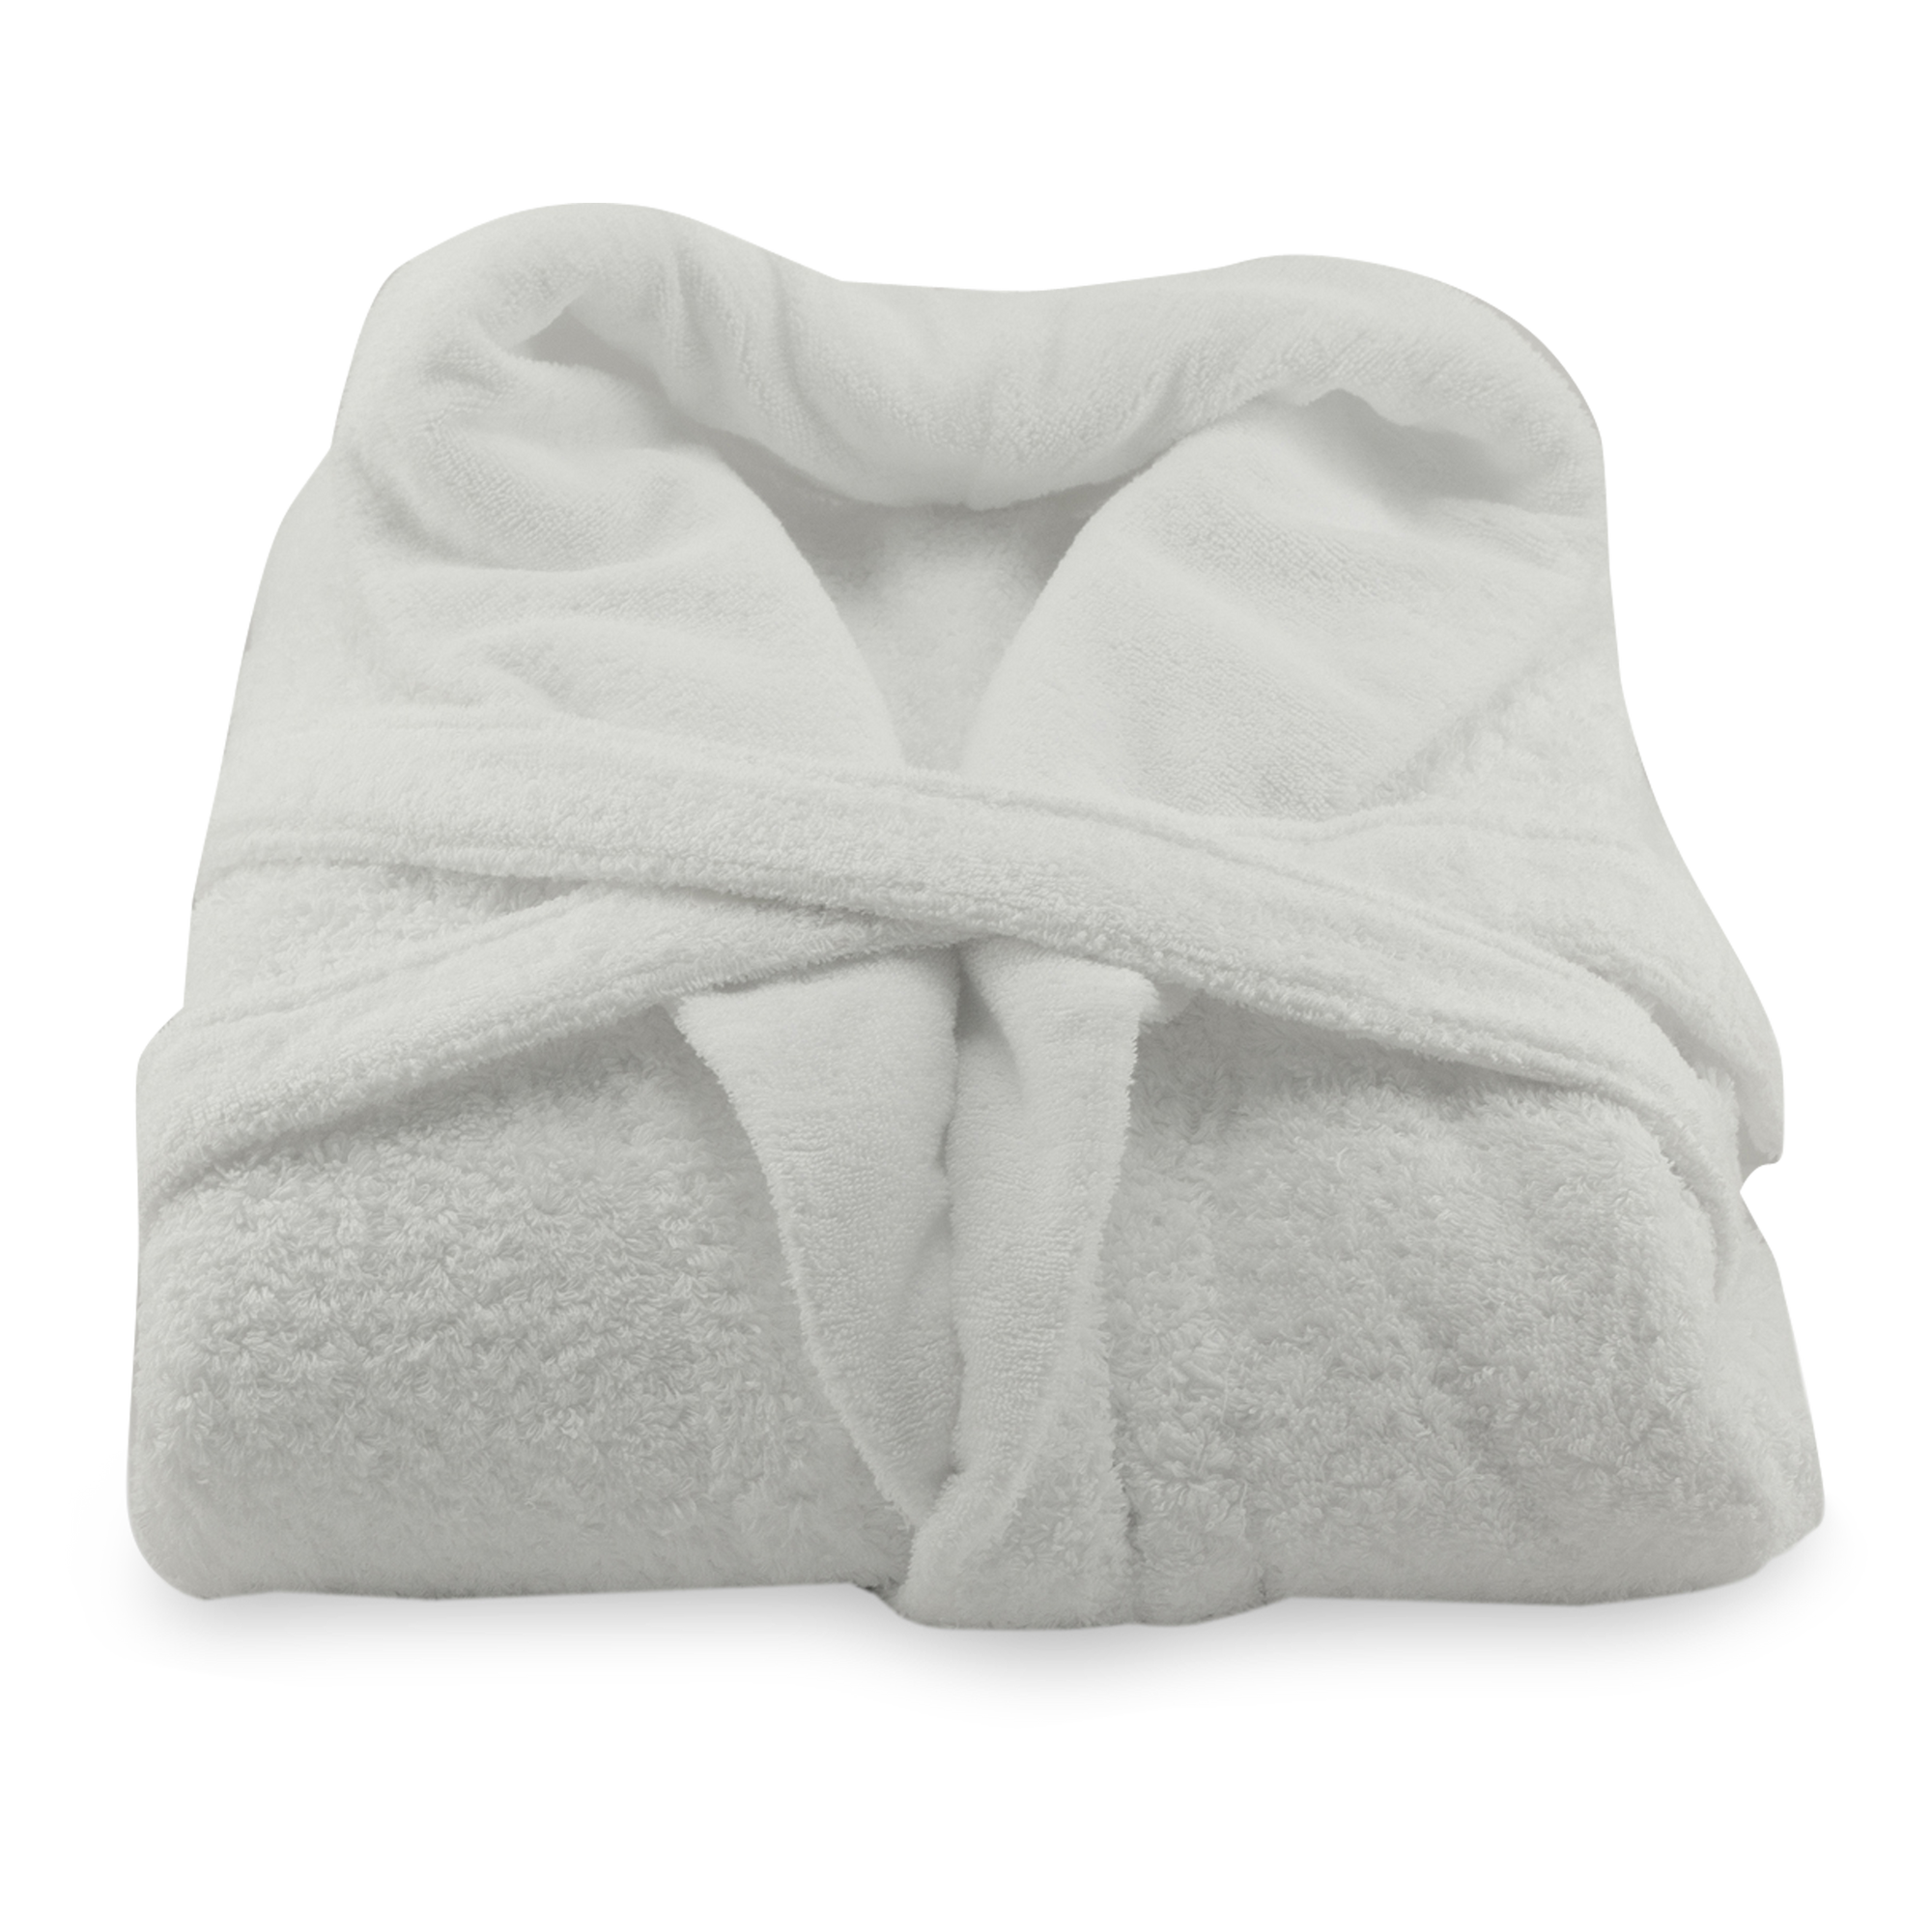 Relax in ultimate luxury with this gorgeous Super Pile bathrobe from Abyss & Habidecor.